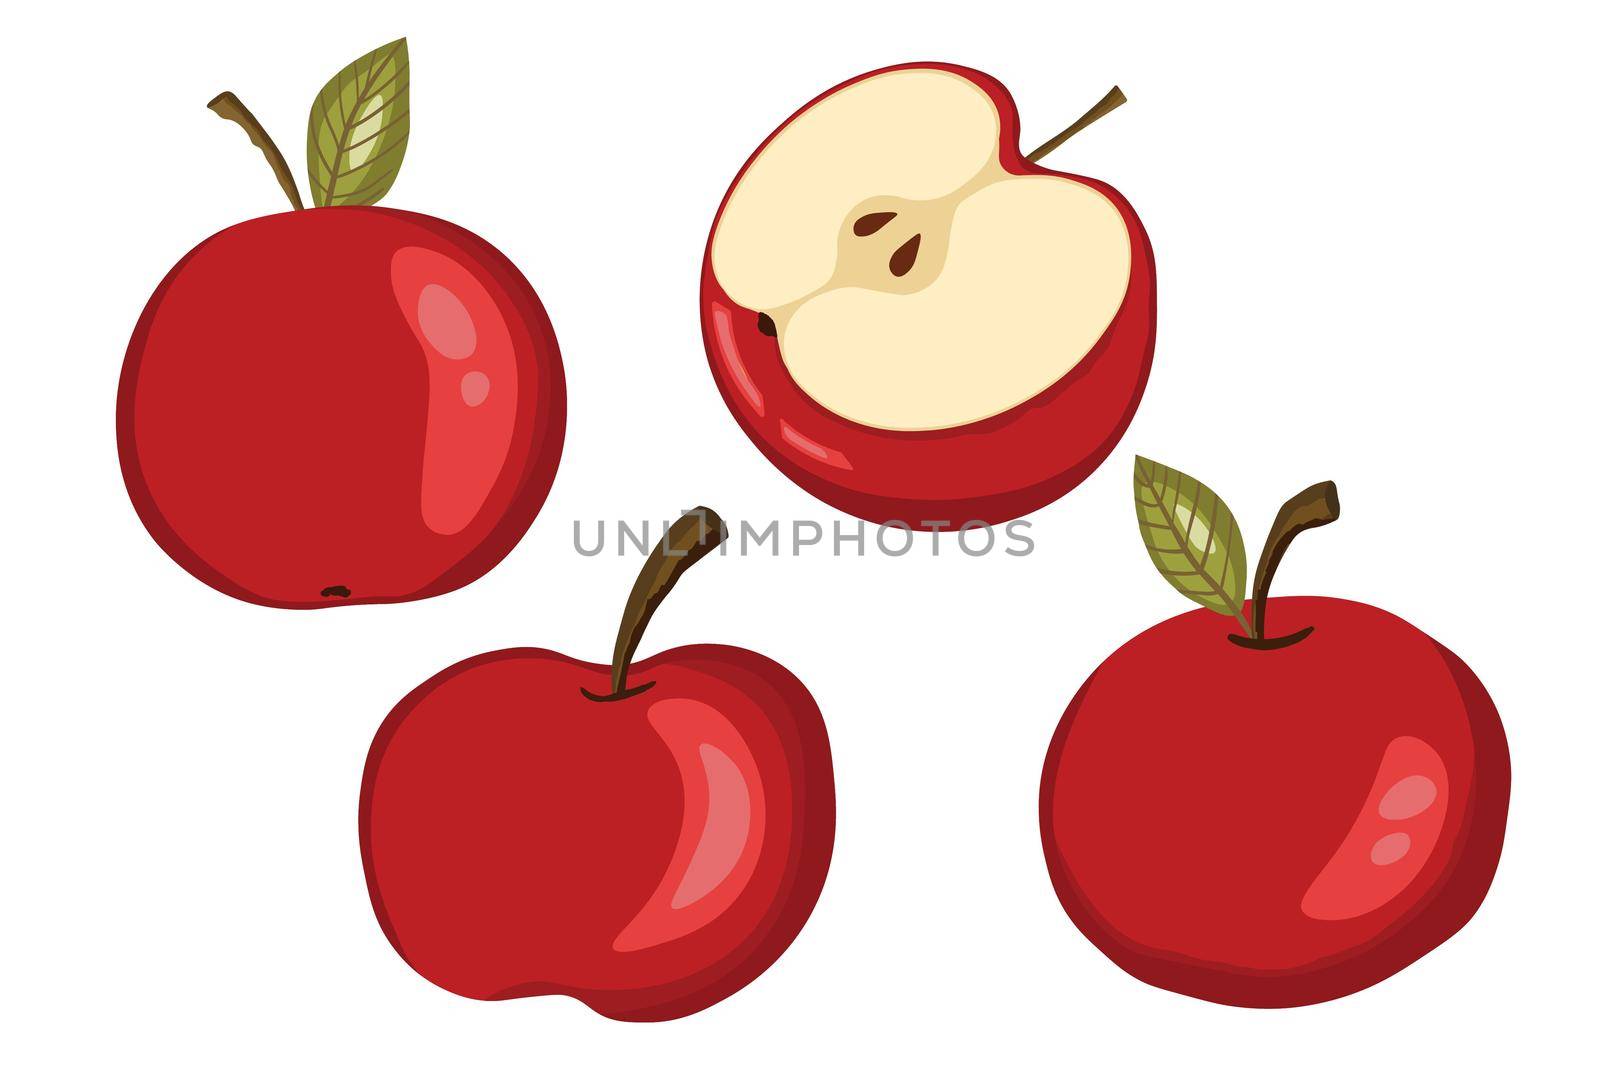 Apple icon set solated on white background. Natural delicious fresh ripe tasty fruit. Template vector illustration for packaging, banner, card. Stylized apples with leaves, apple slice. Food concept.